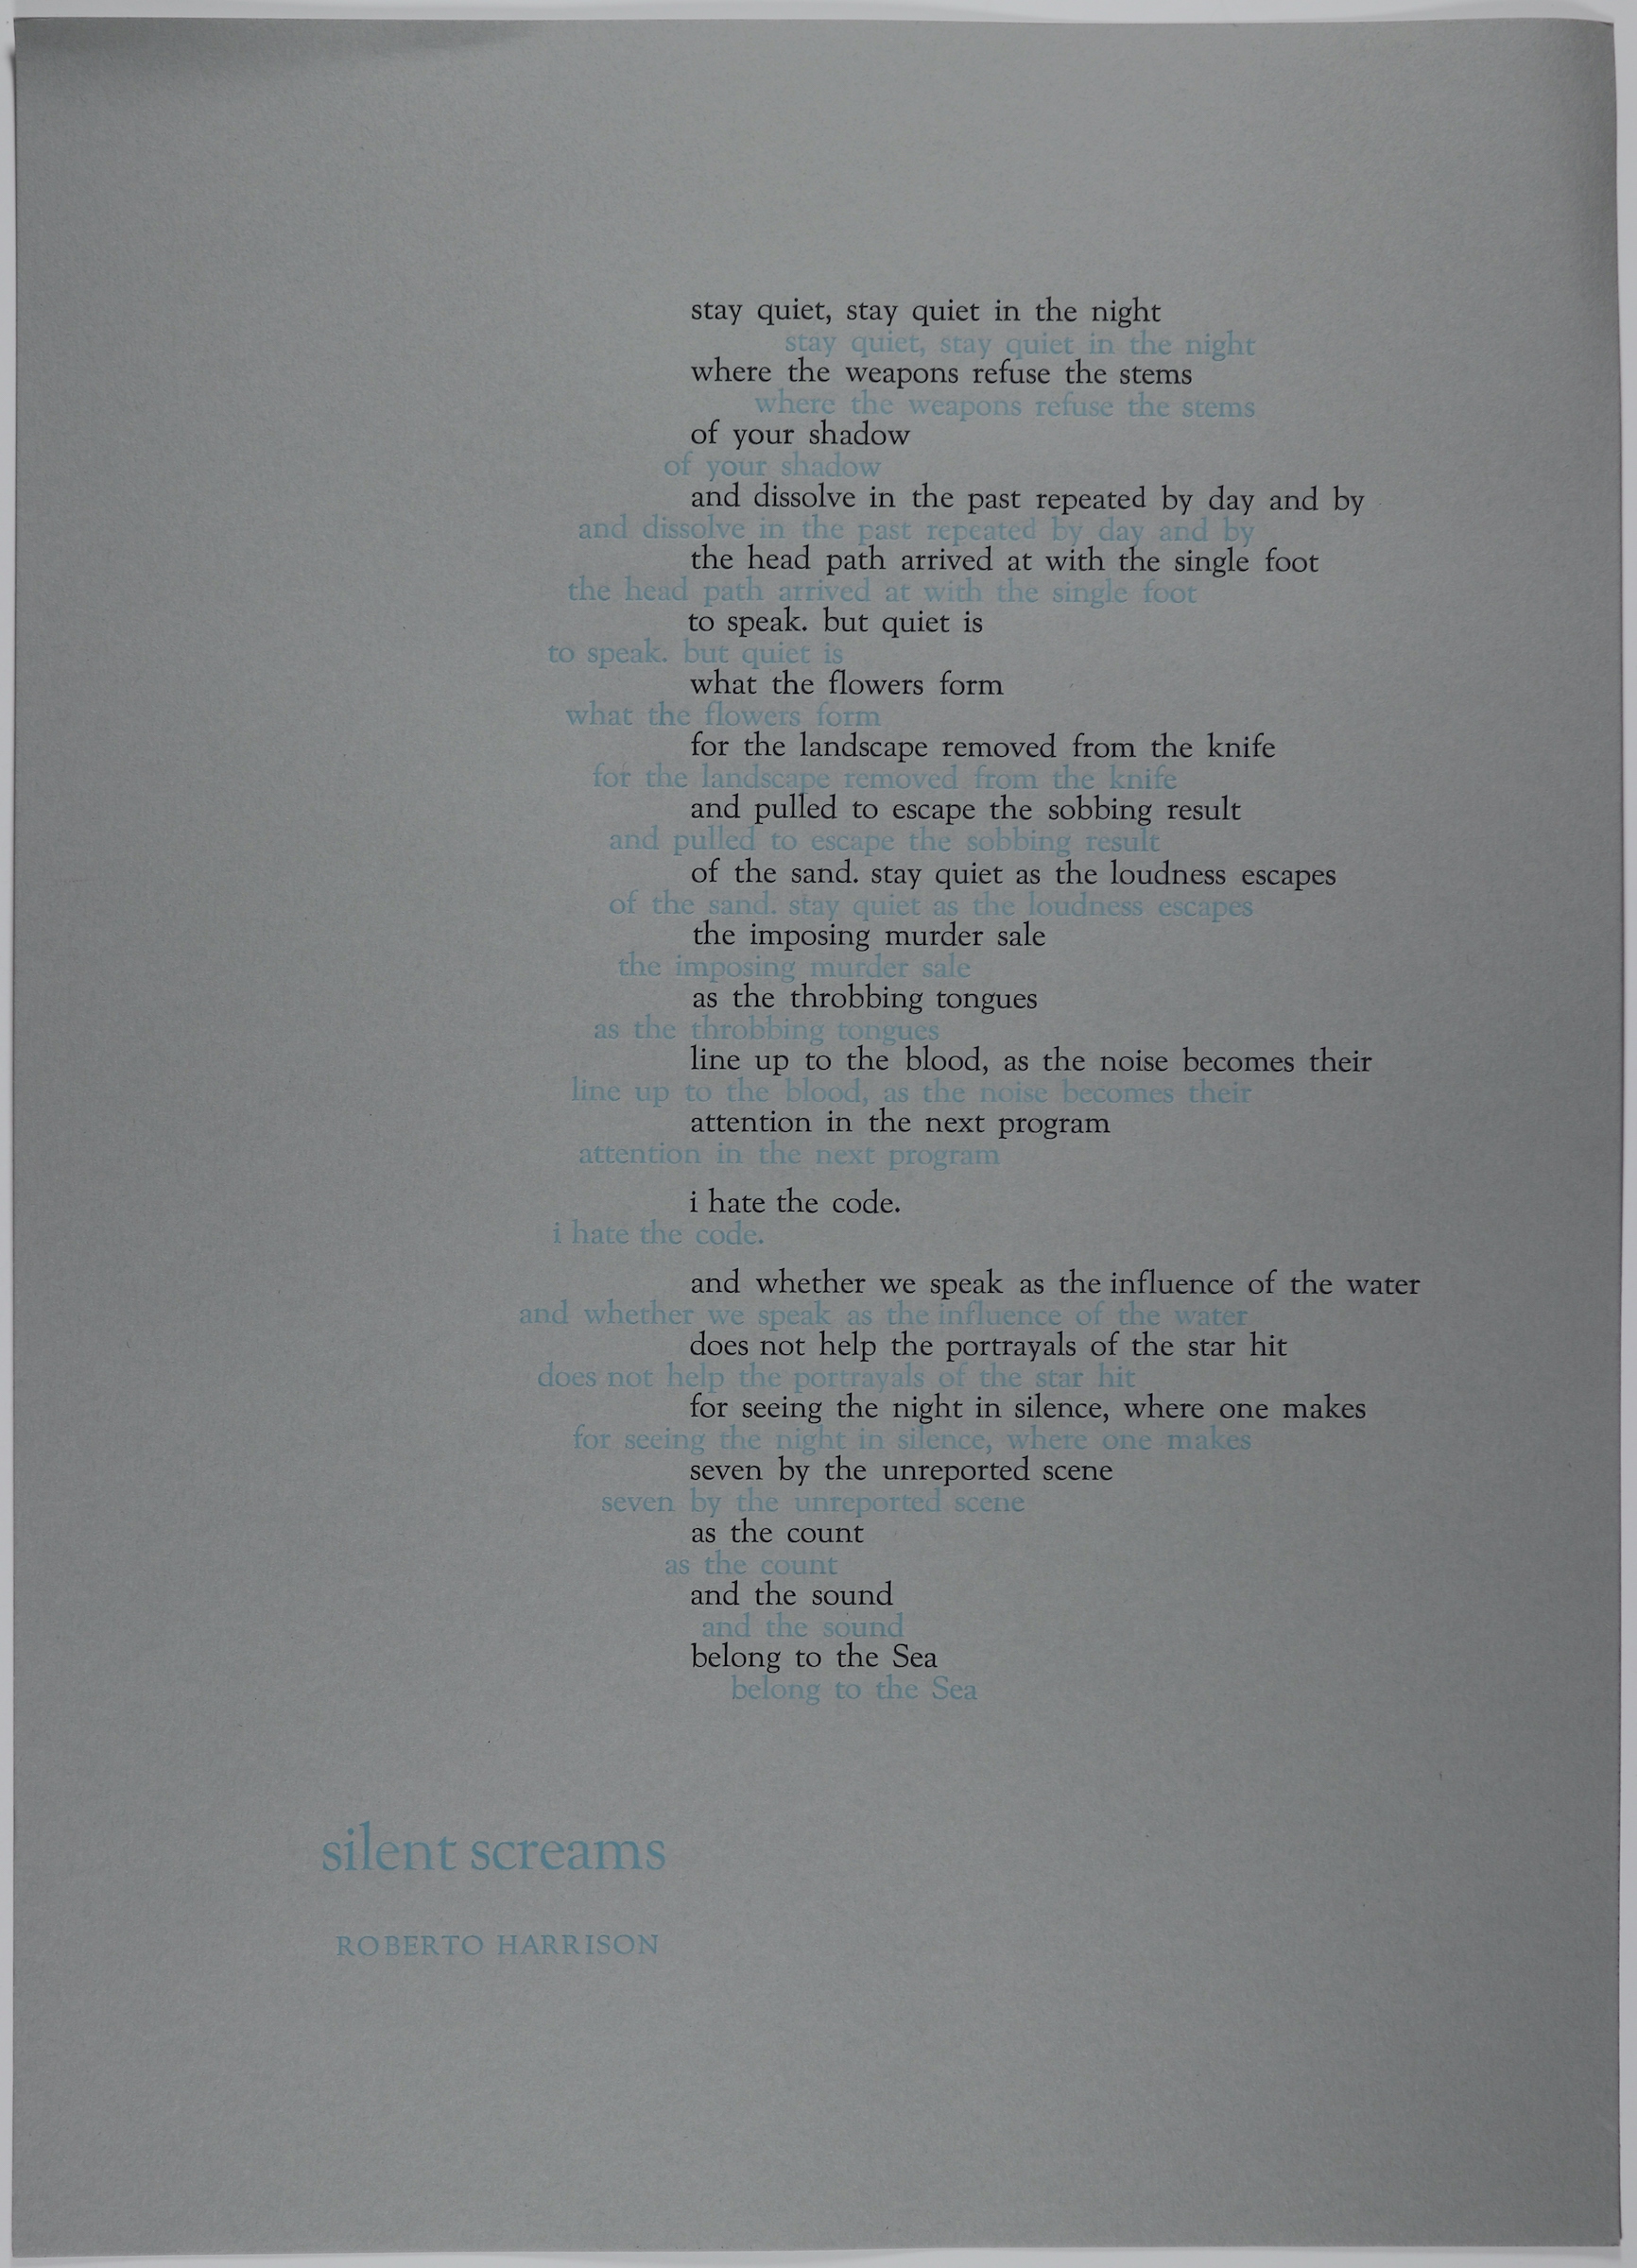 Broadside consists of a gray background with the text centered towards the right. Title is below on the left in light blue, and some lines of sentences in between the black colored sentences are also in light blue. Certain words in light blue also stick out from the body of the poem towards the left of it.